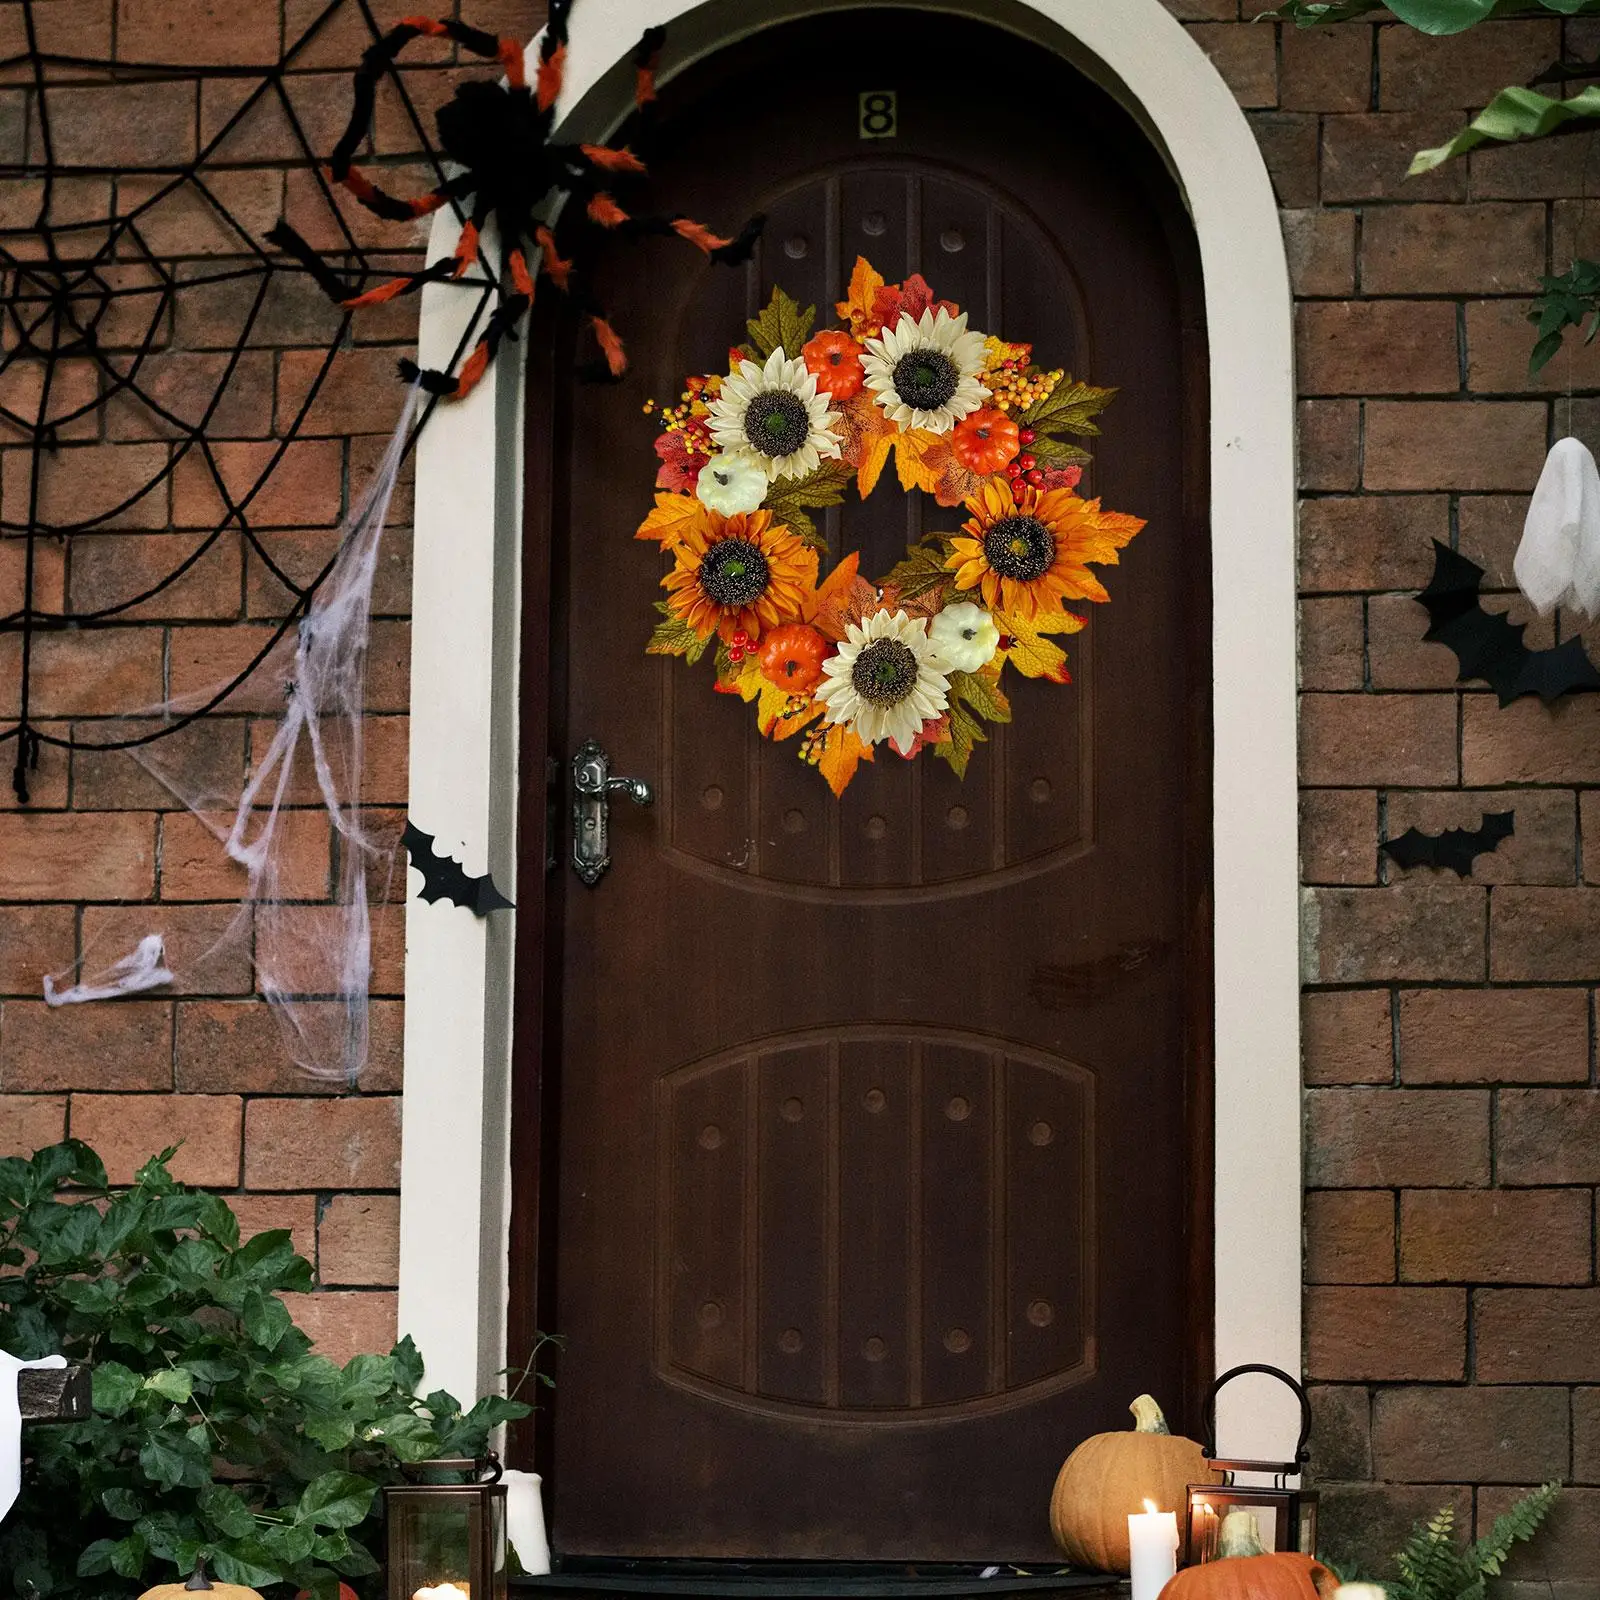 Garland Hanger Berries Maple Leaves 17 inch Fall Decor Wreath for Front Door for Window Fireplace Front Door Fall Holiday